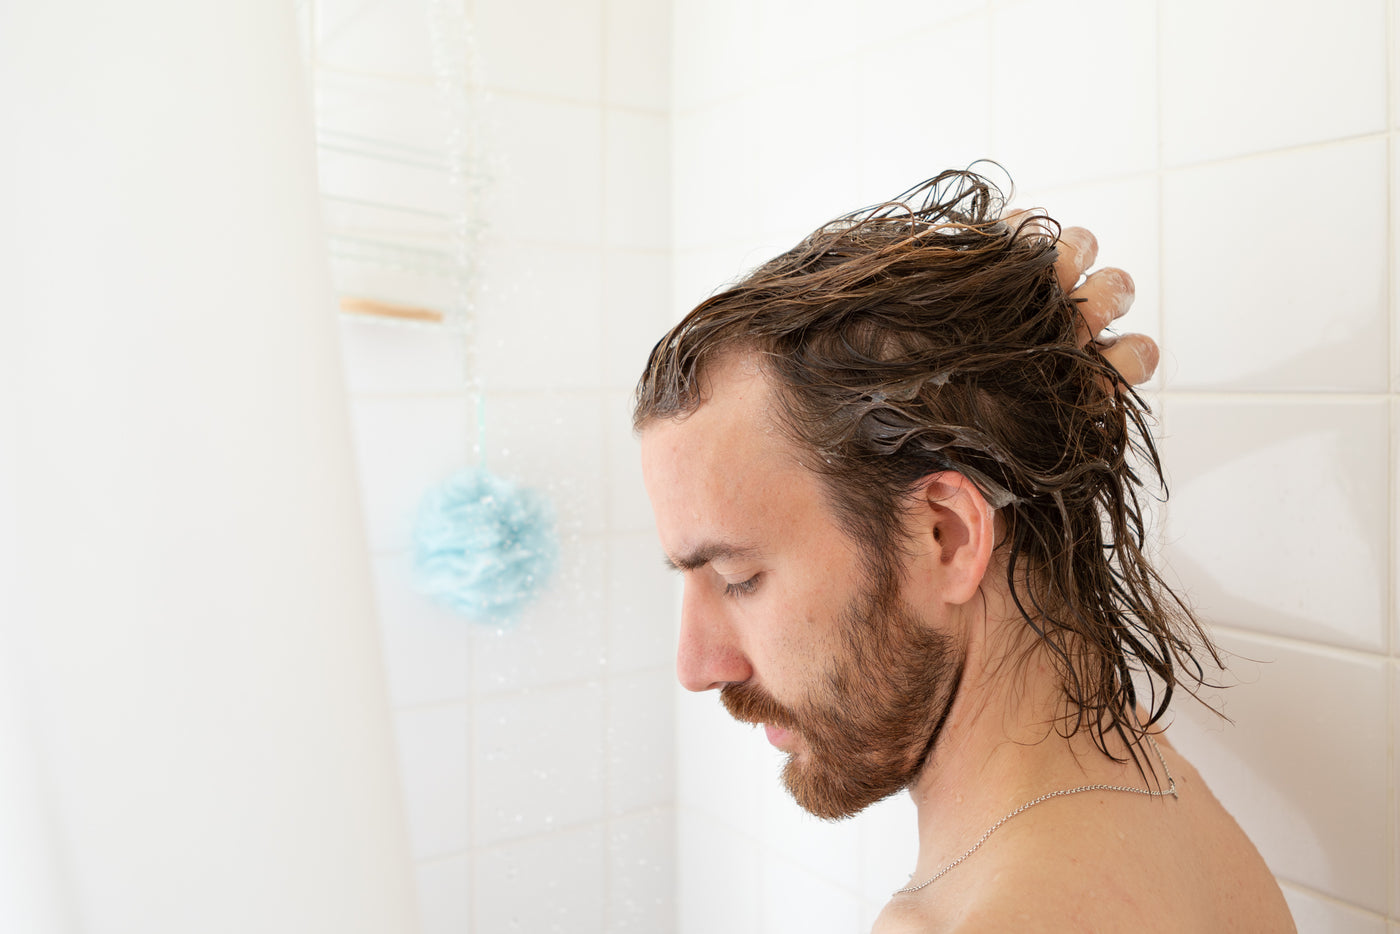 Thinking about impact of shampoo industry in shower